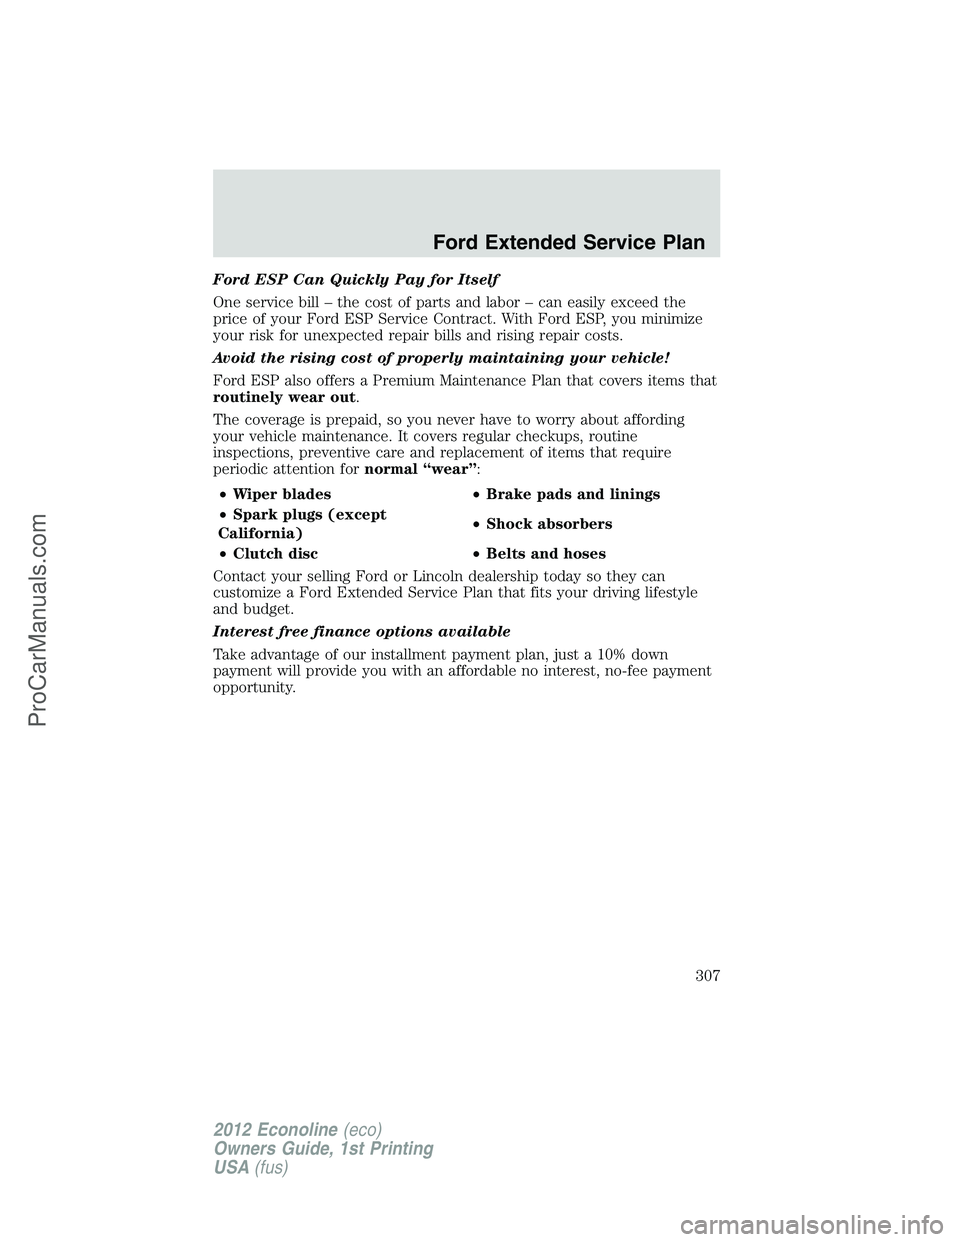 FORD E-250 2012 Service Manual Ford ESP Can Quickly Pay for Itself
One service bill – the cost of parts and labor – can easily exceed the
price of your Ford ESP Service Contract. With Ford ESP, you minimize
your risk for unexpe